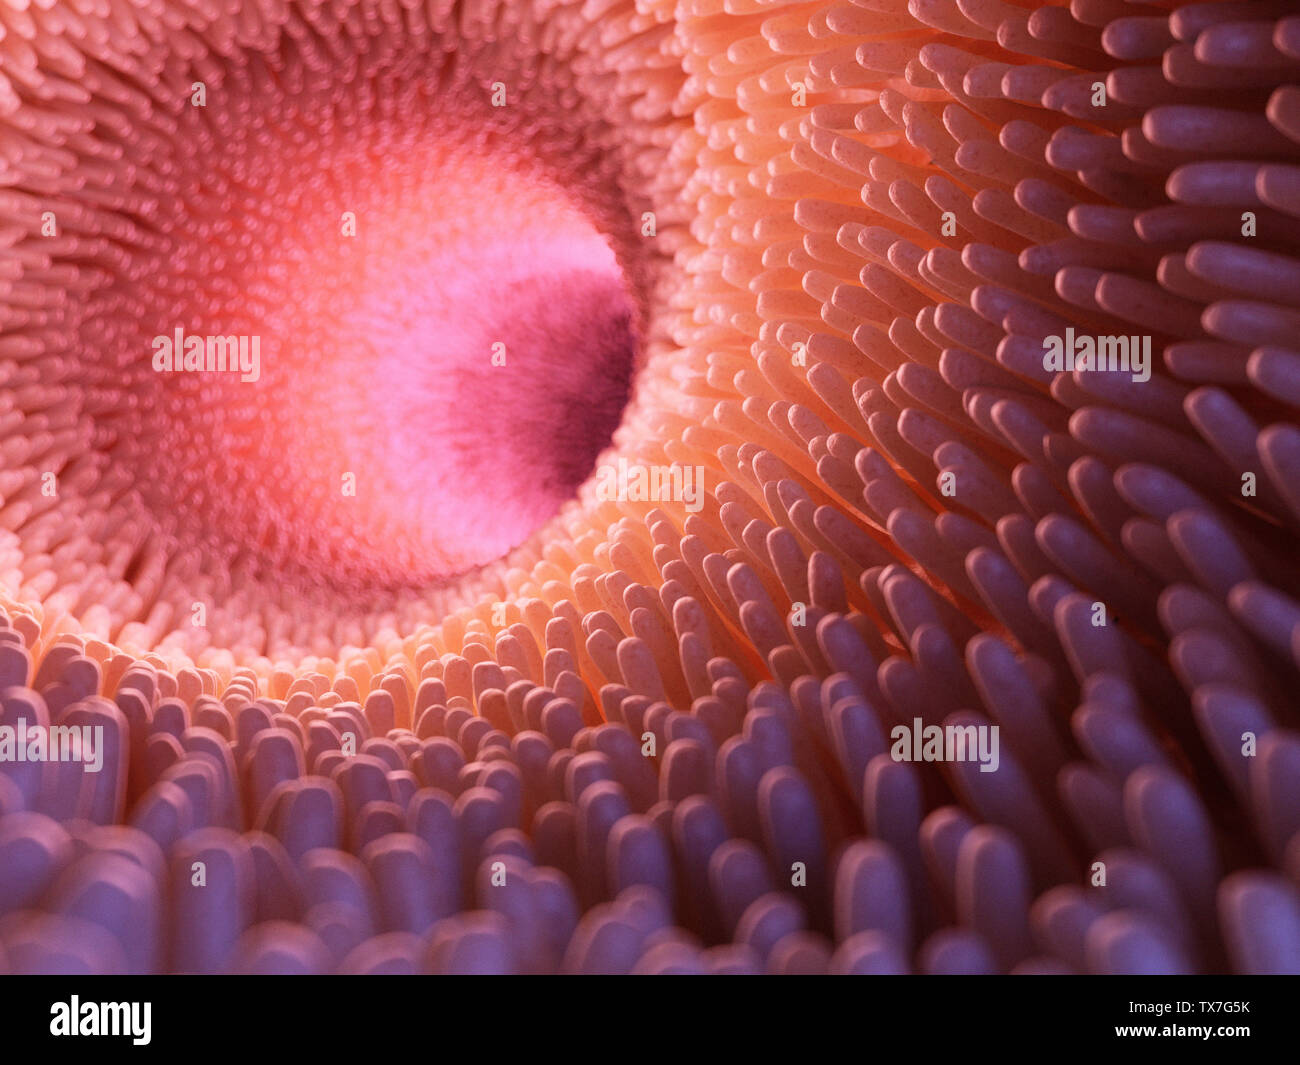 3d rendered medically accurate illustration of intestinal villi Stock Photo